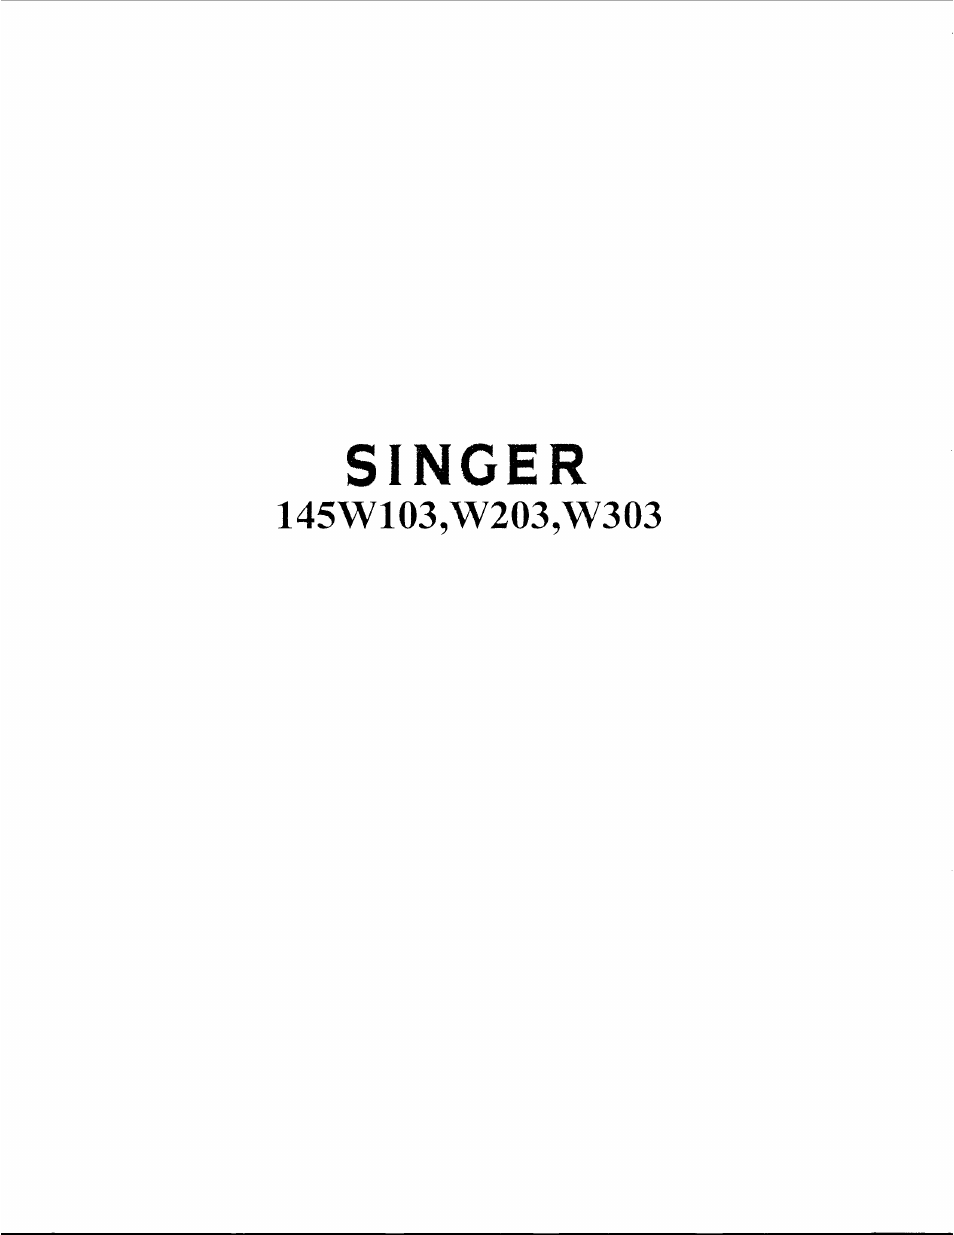 SINGER W203 User Manual | 13 pages